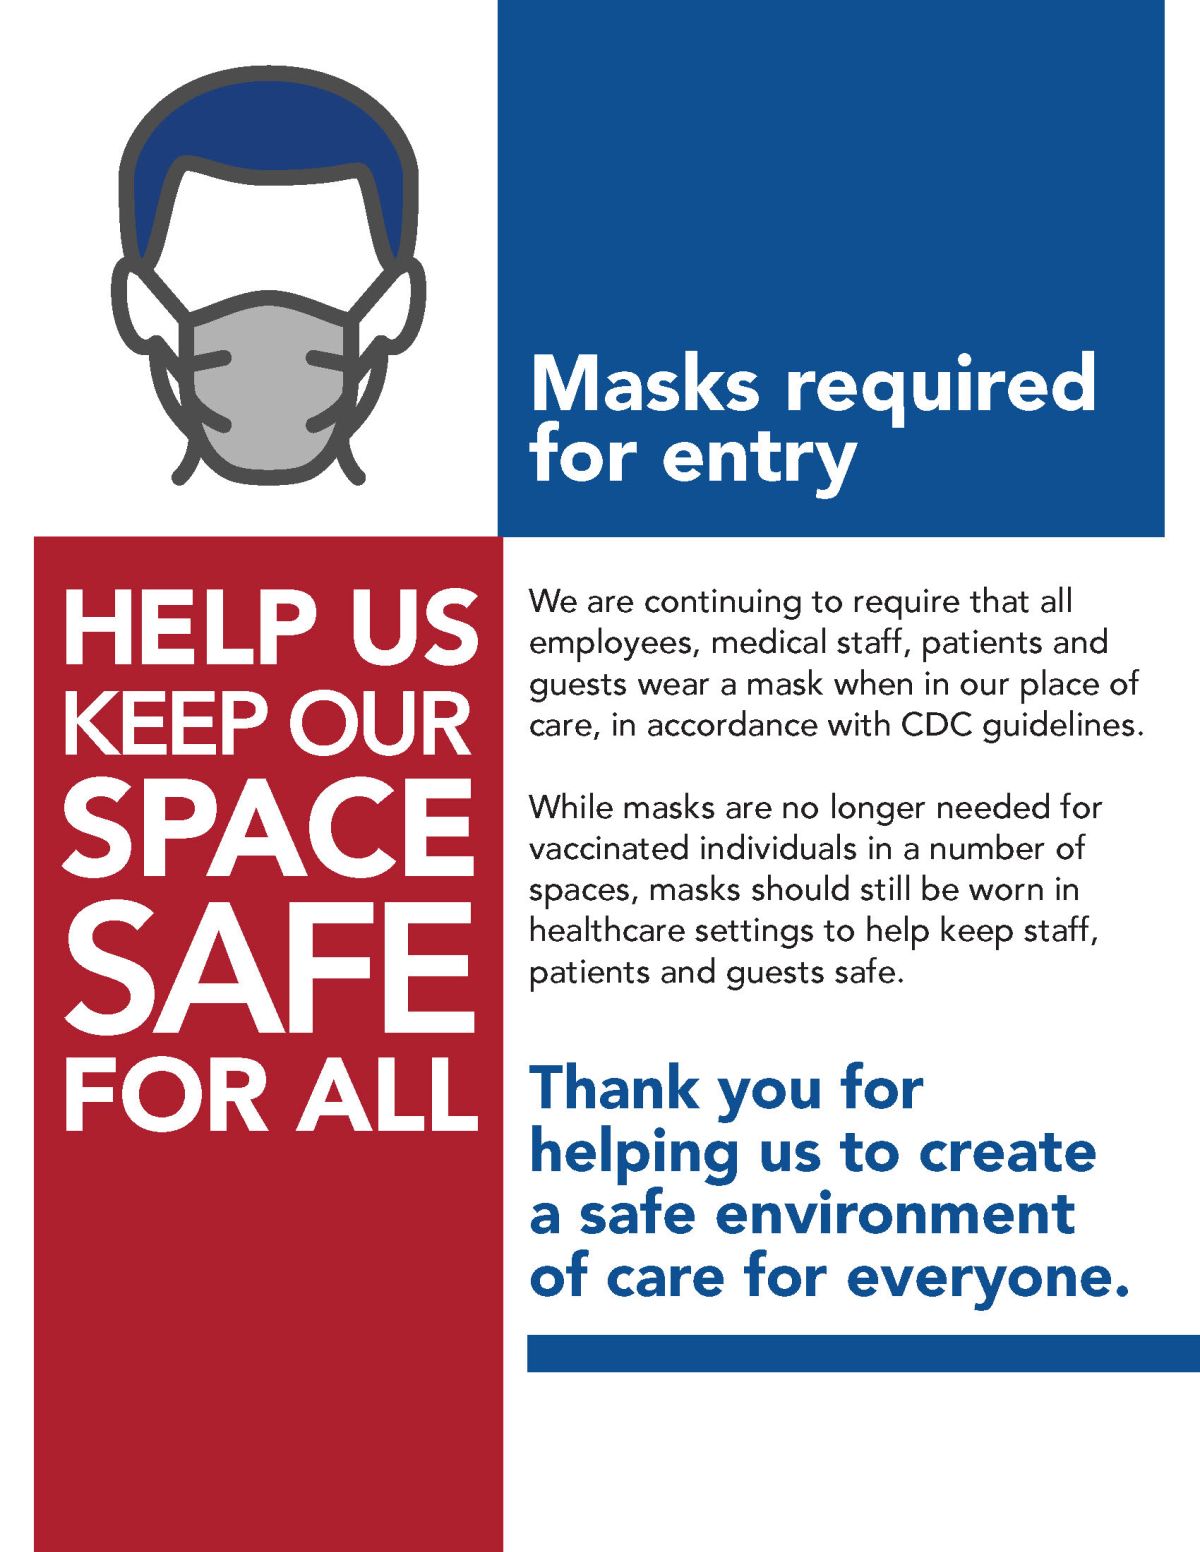 Masks required for entry